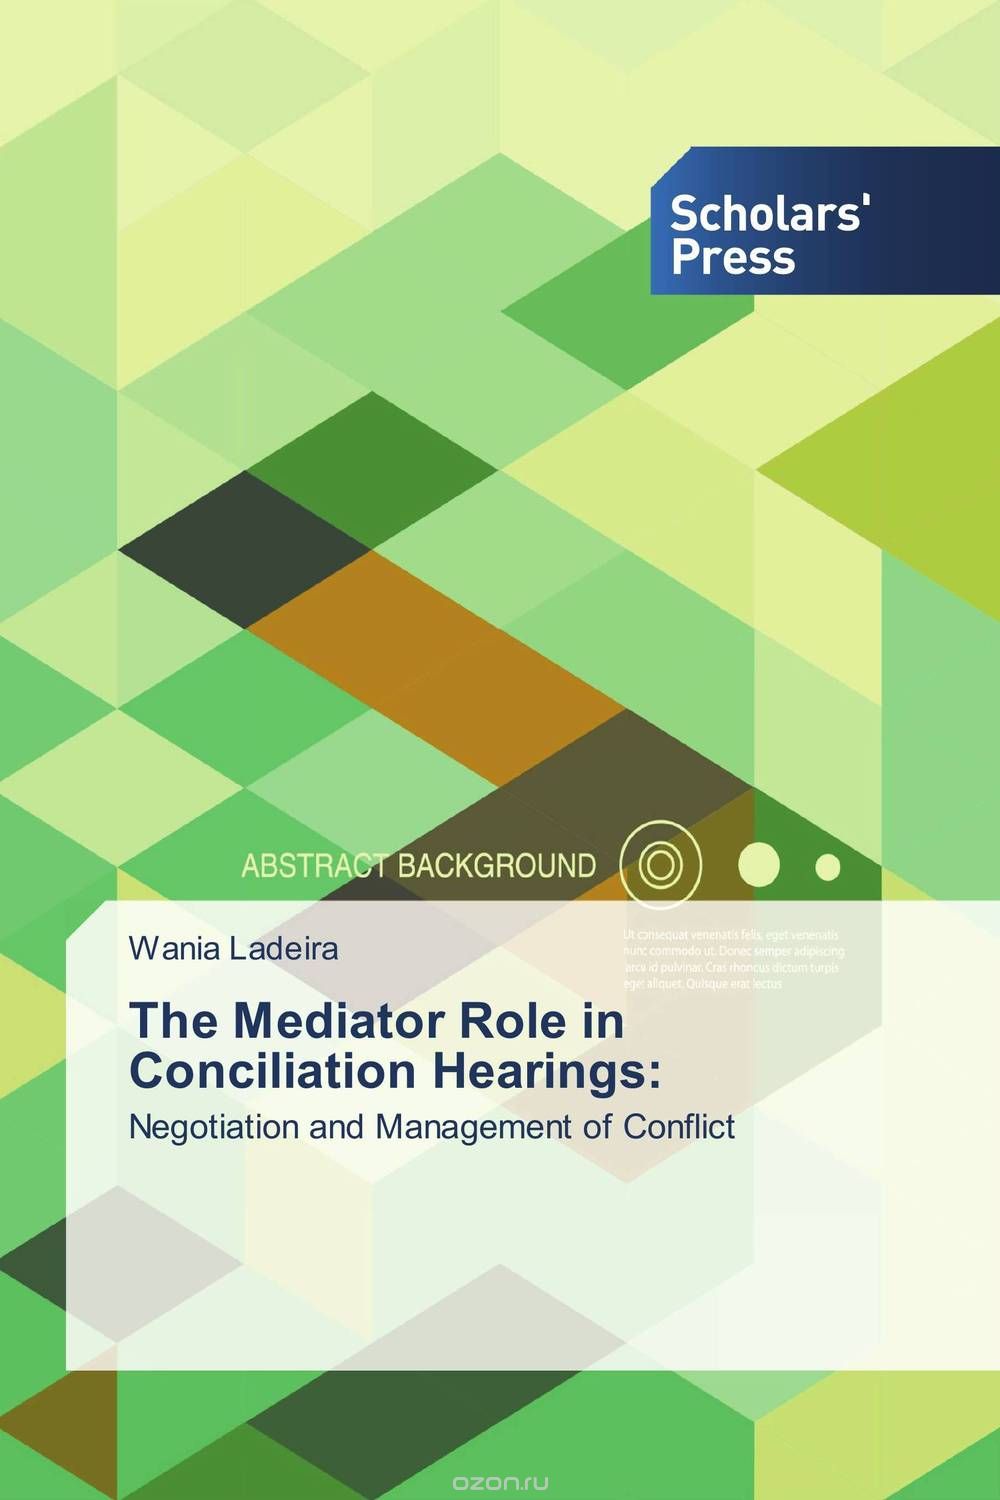 The Mediator Role in Conciliation Hearings: